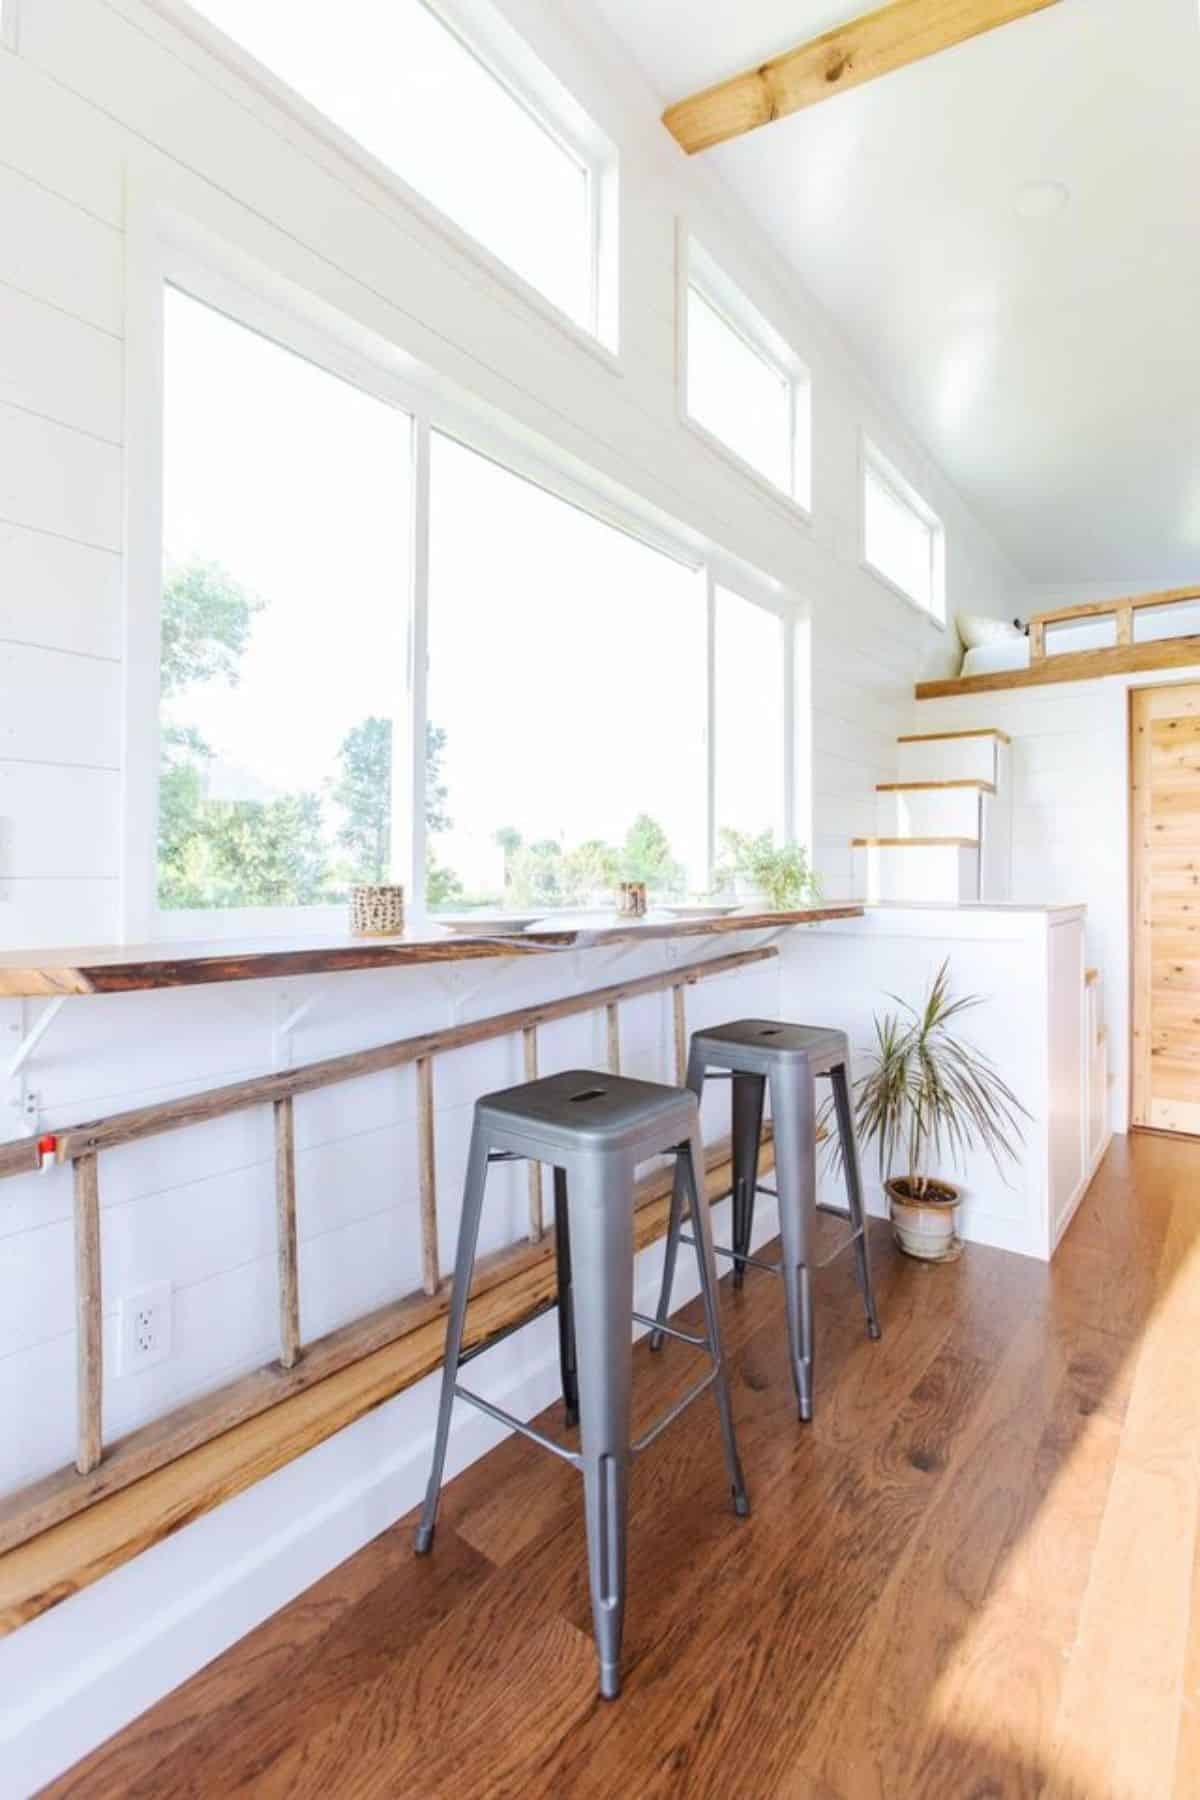 Dining area besides the huge window and stairs leading to the loft bedroom of one bedroom tiny home